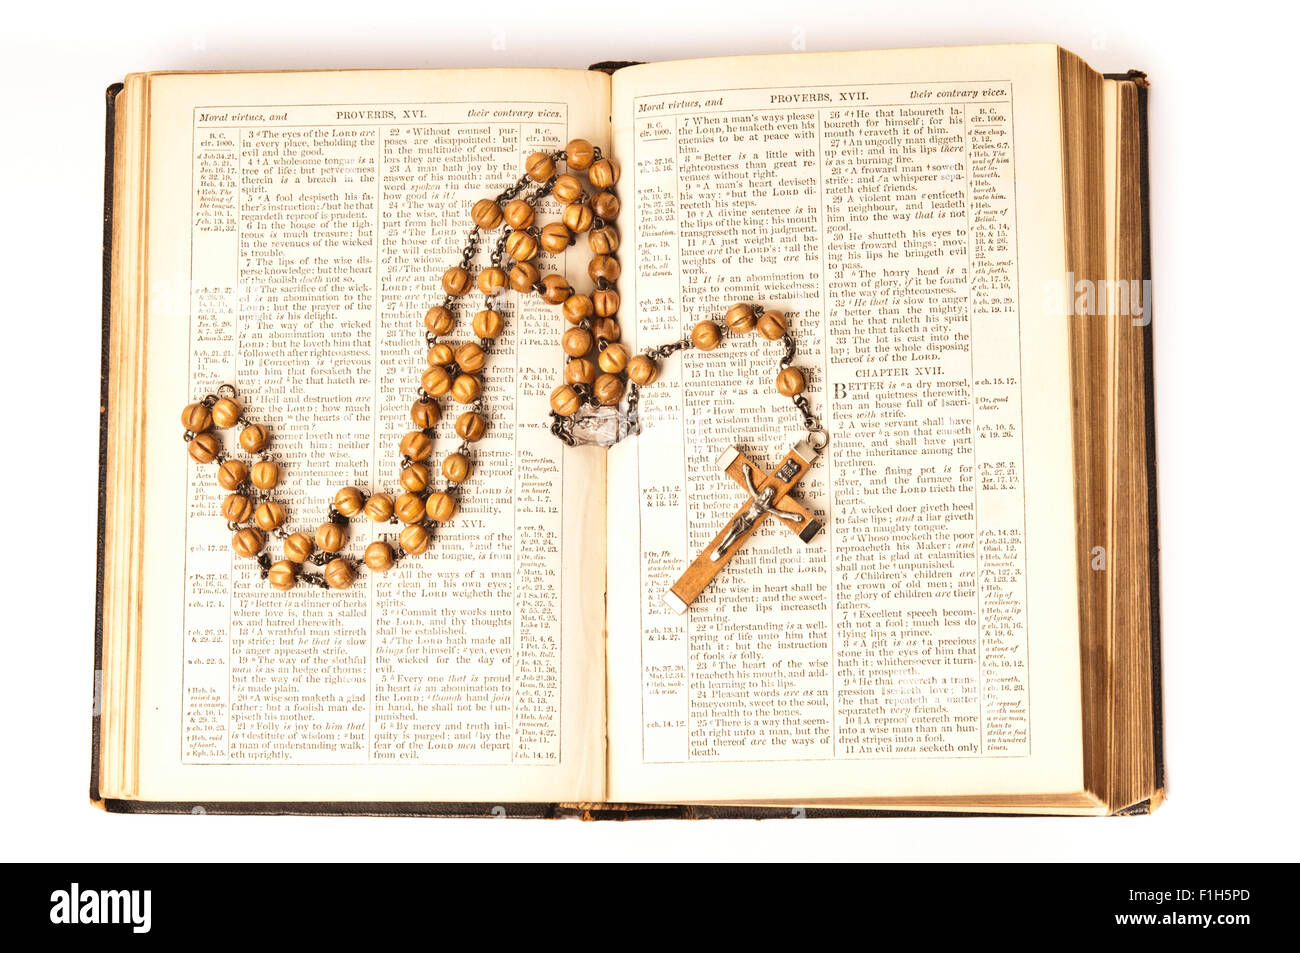 rosary on bible, isolated Stock Photo